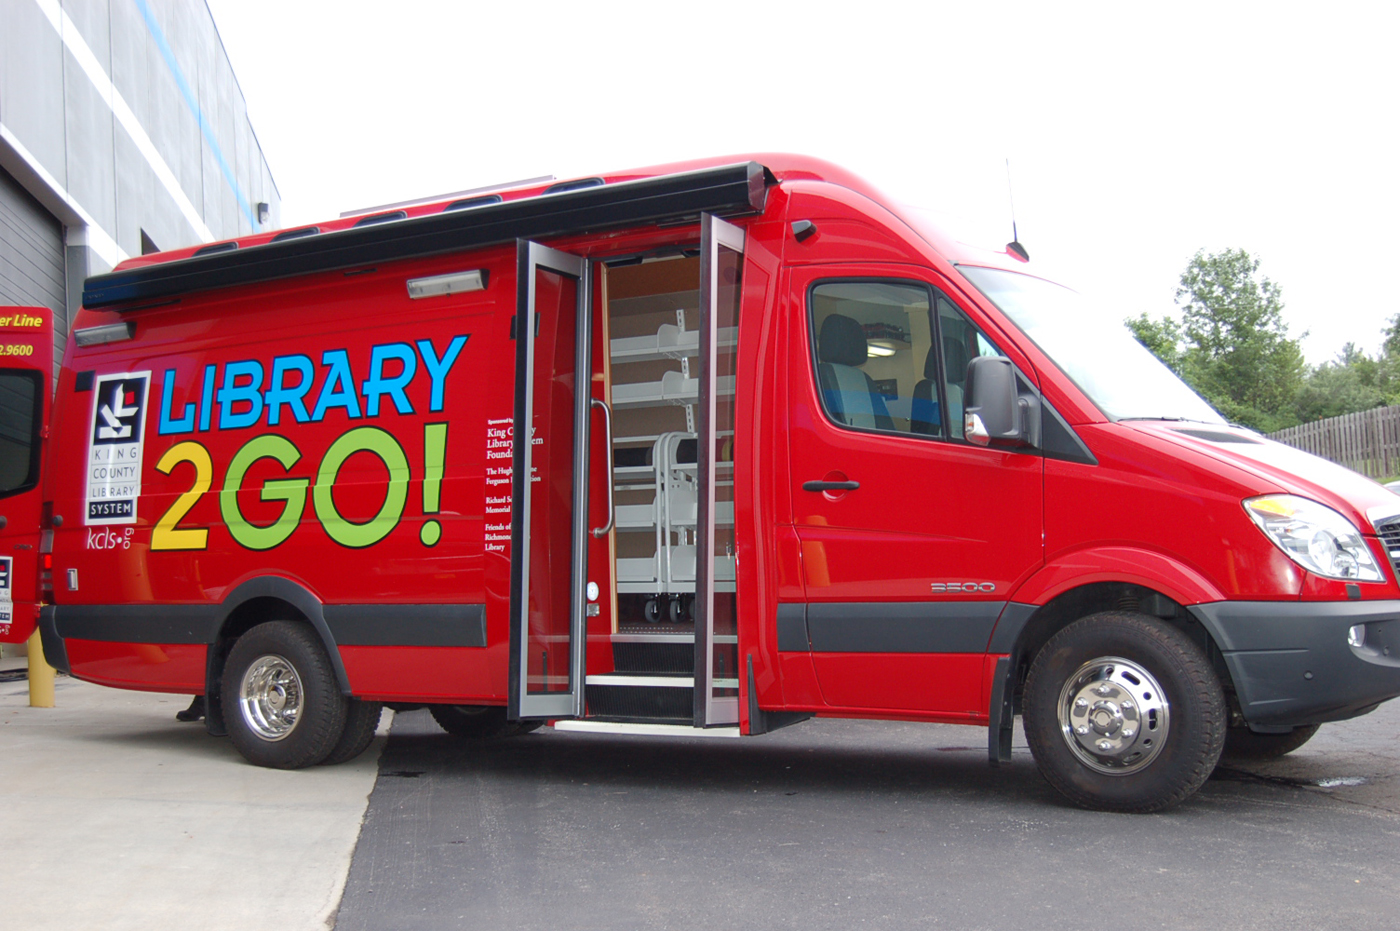 Library2Go at Blakely Hall